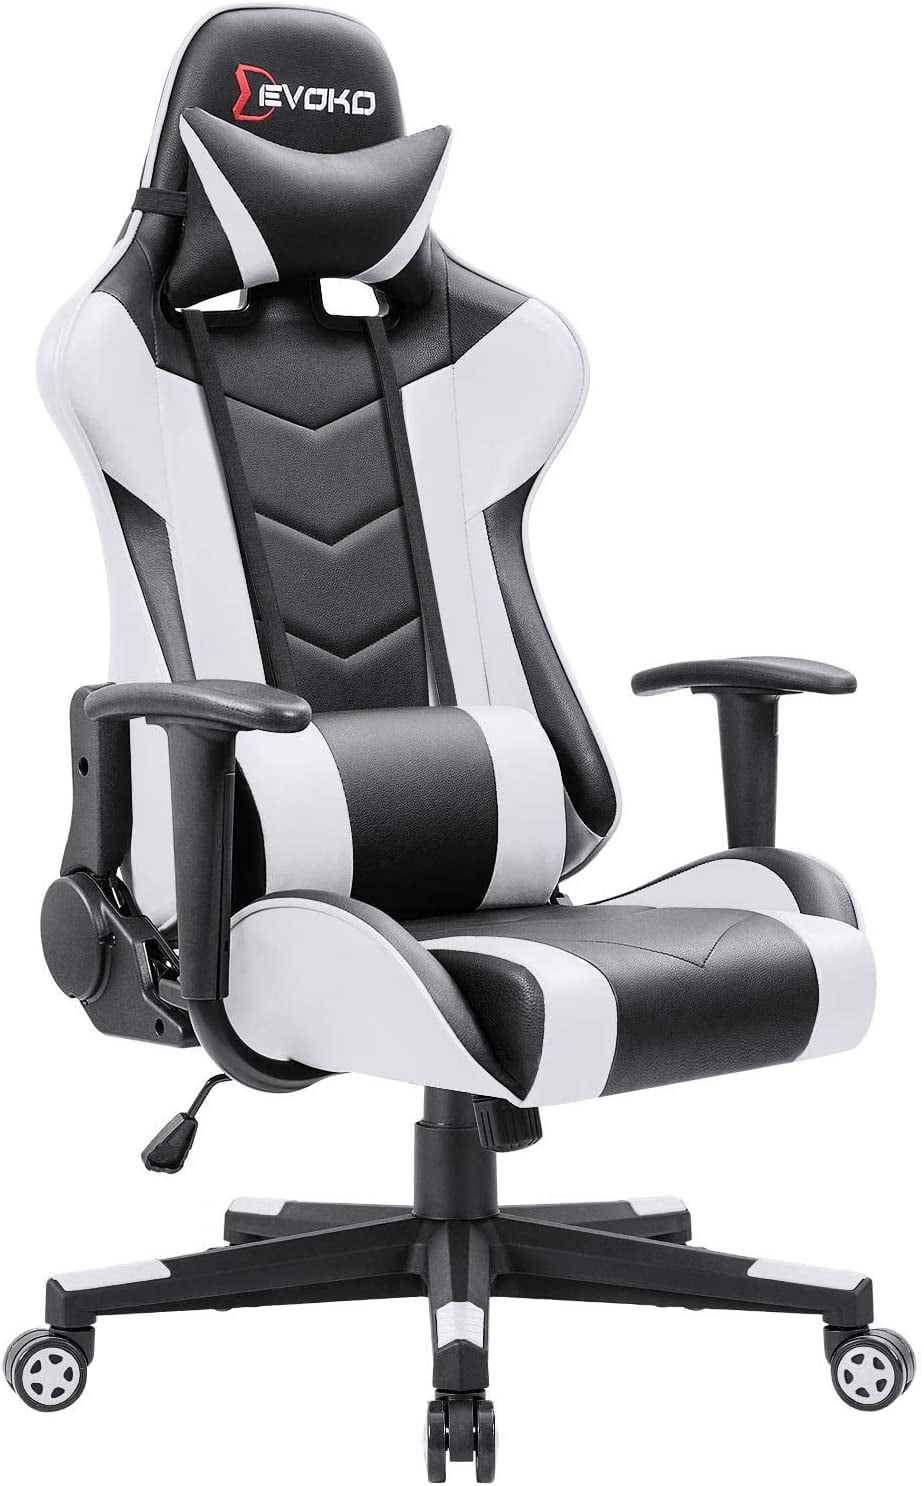 Devoko Ergonomic Gaming Chair Racing Style Adjustable Height High Back Pc Computer Chair With Headrest And Lumbar Support Executive Office Chair White Walmart Com Walmart Com